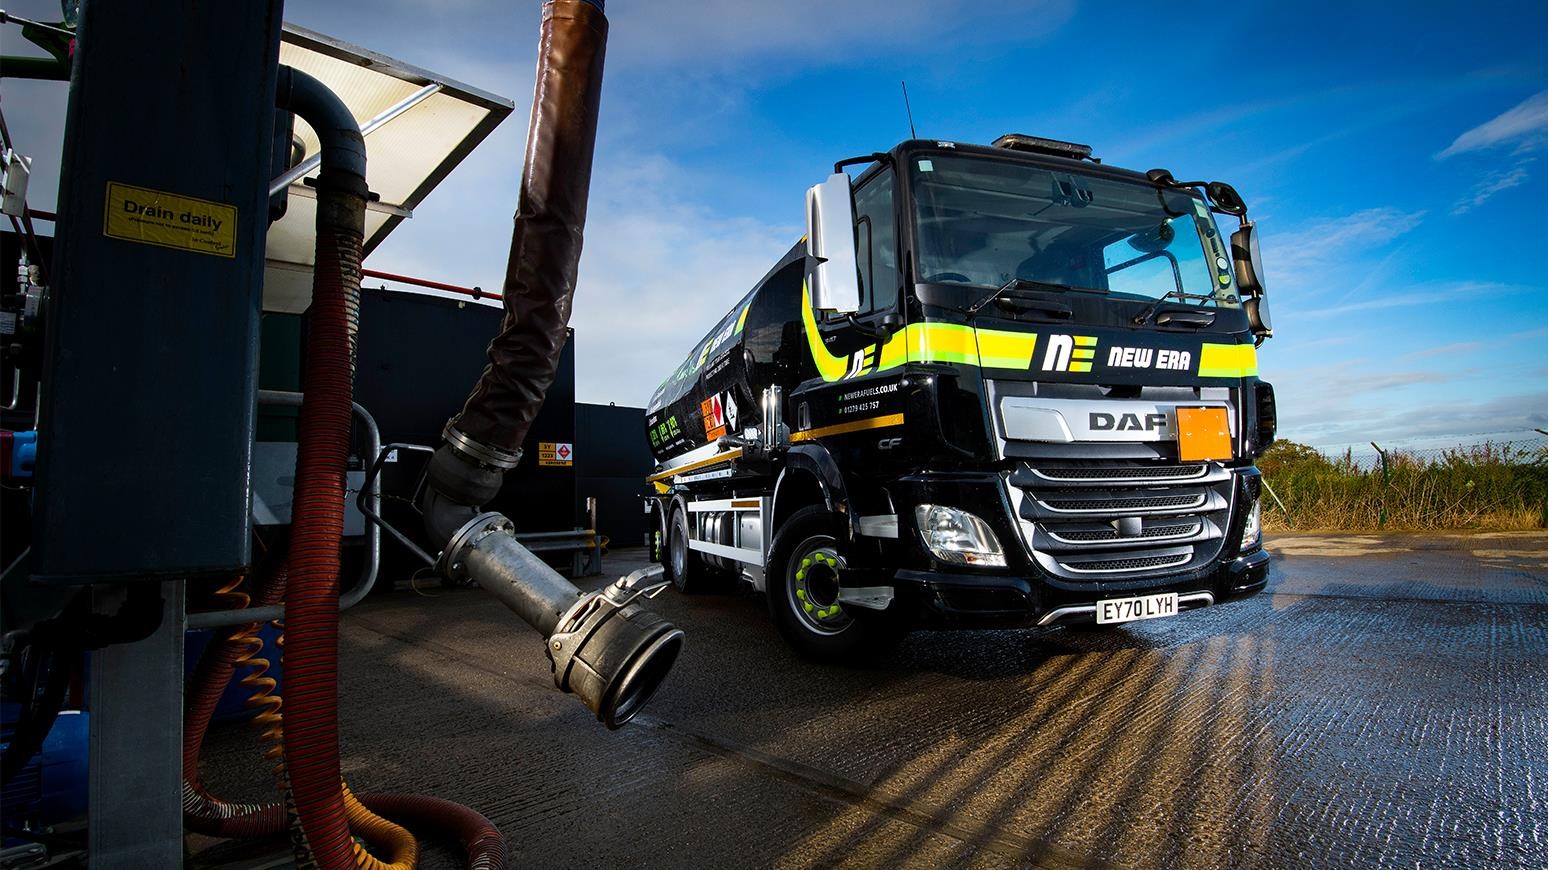 Harlow-Based Fuel Distributor Acquires DAF CF 340 FAN Tanker With Livery Promoting Green D+ HVO